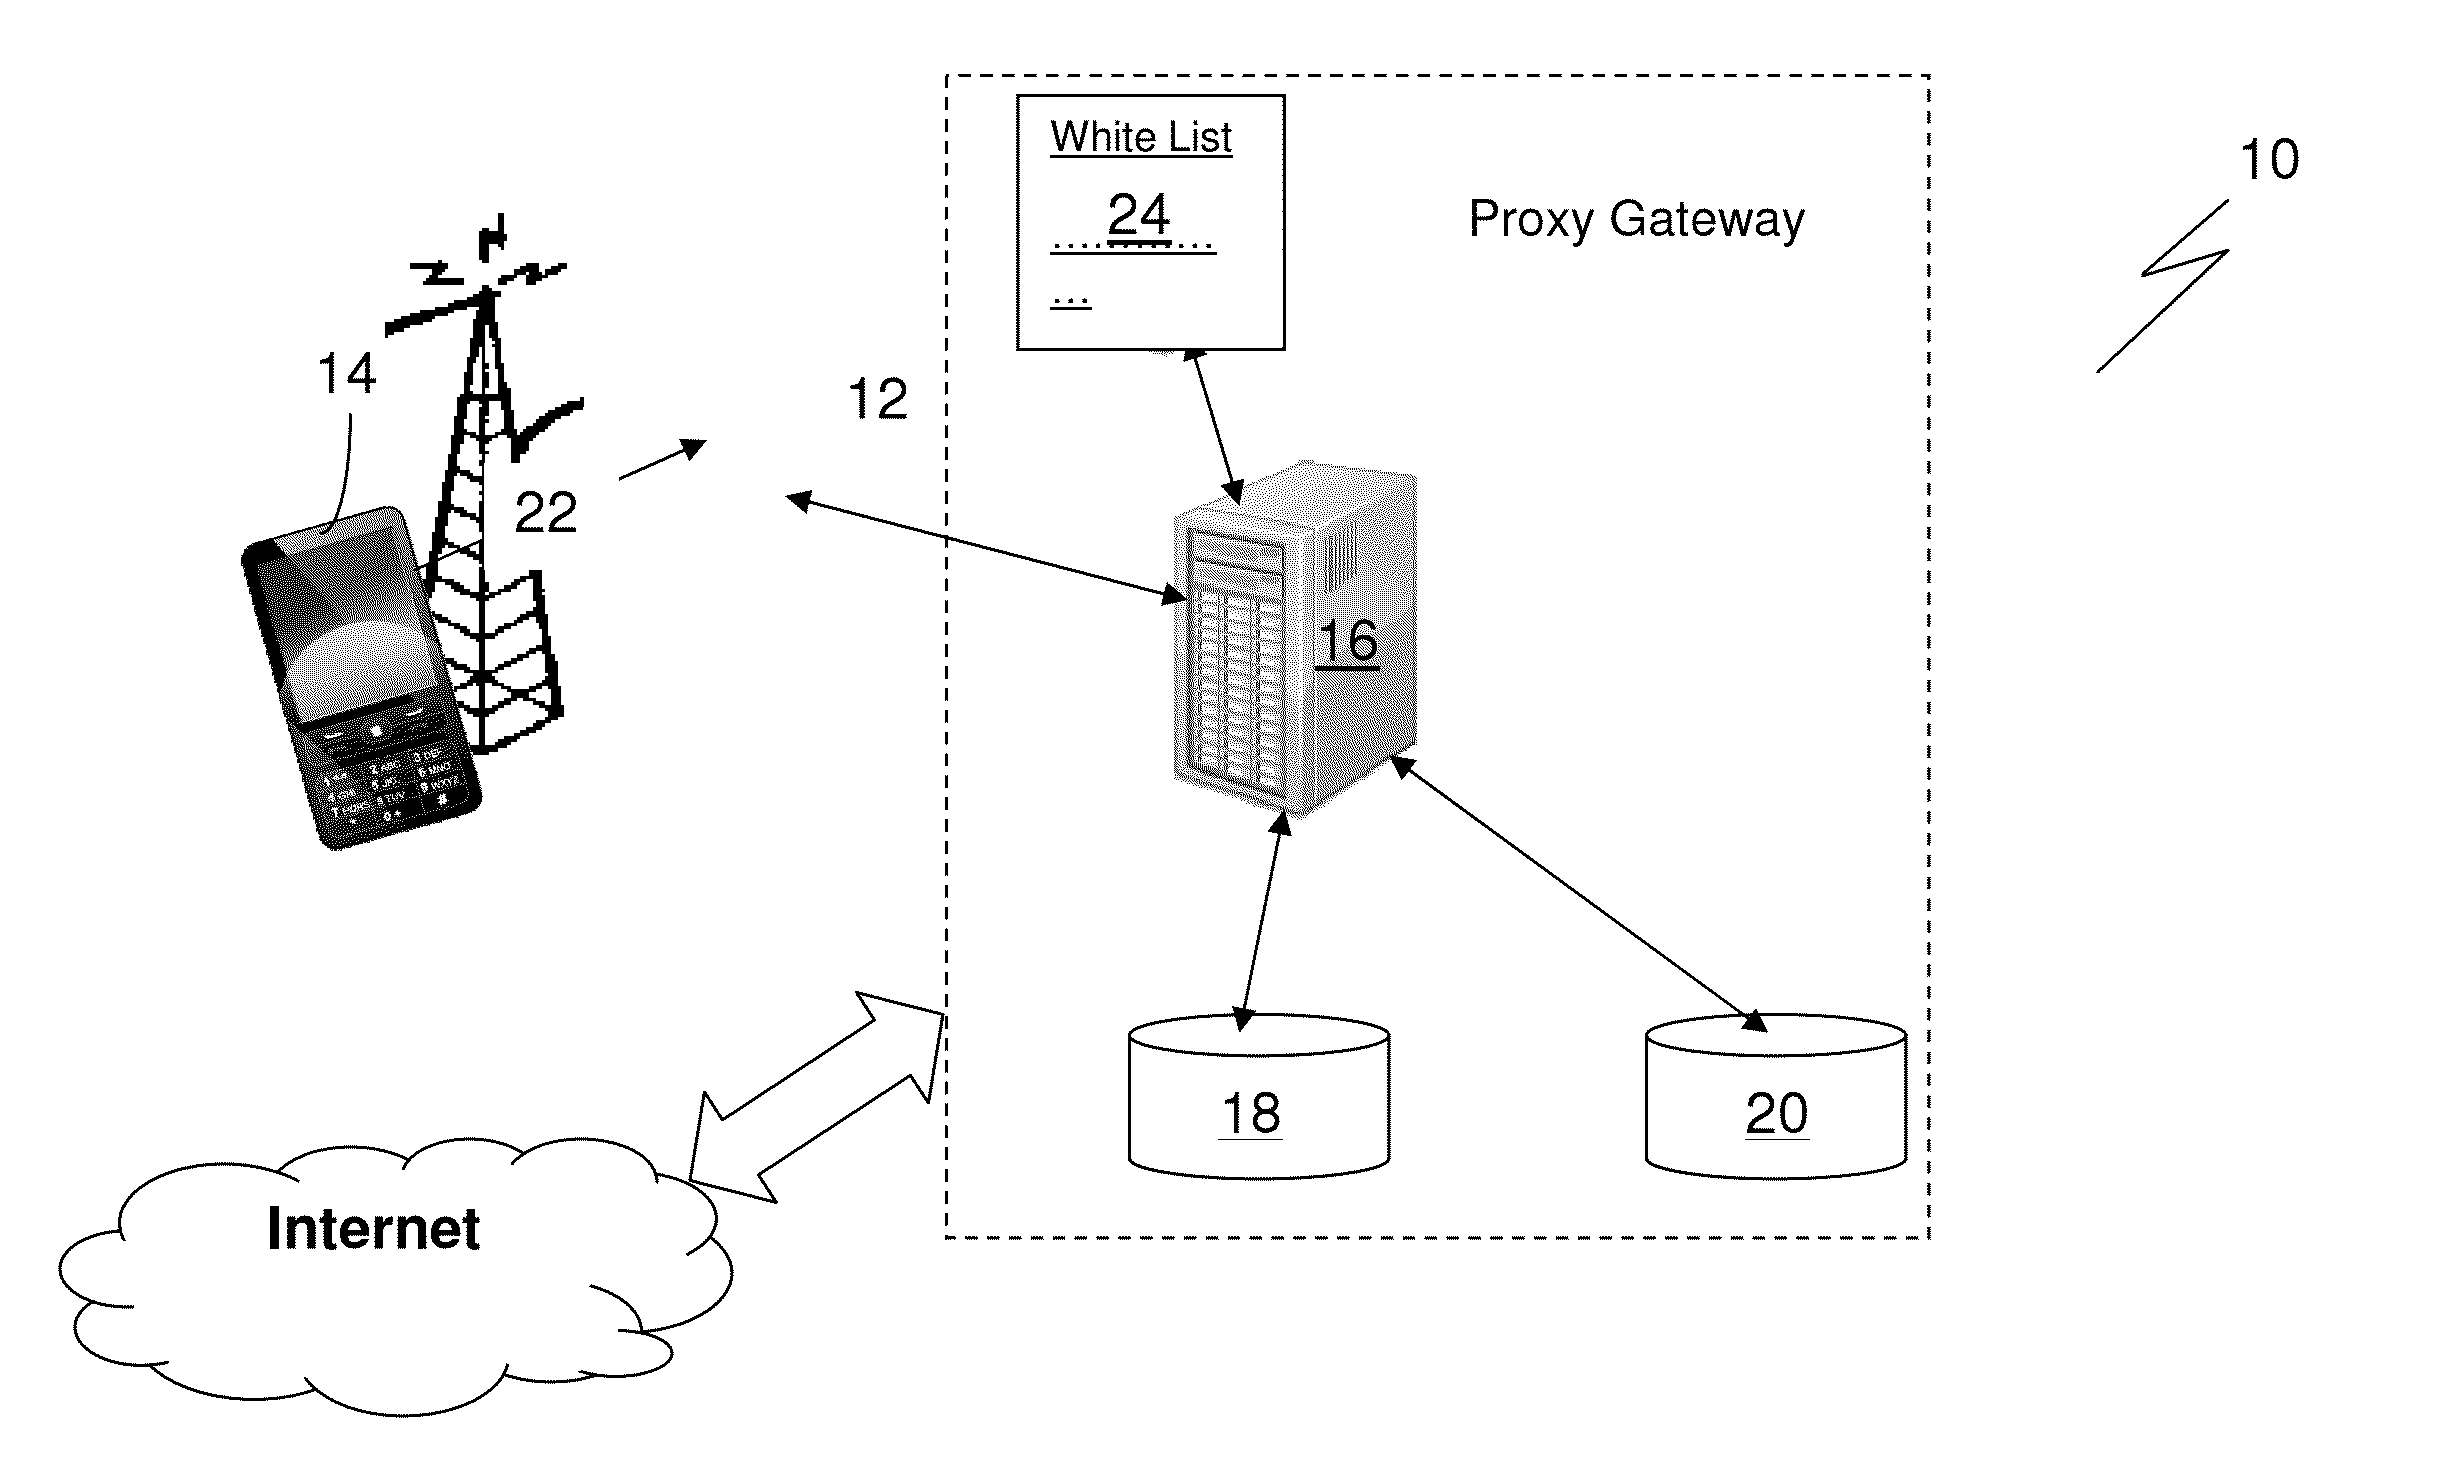 System and method for provisioning internet access to a computing device